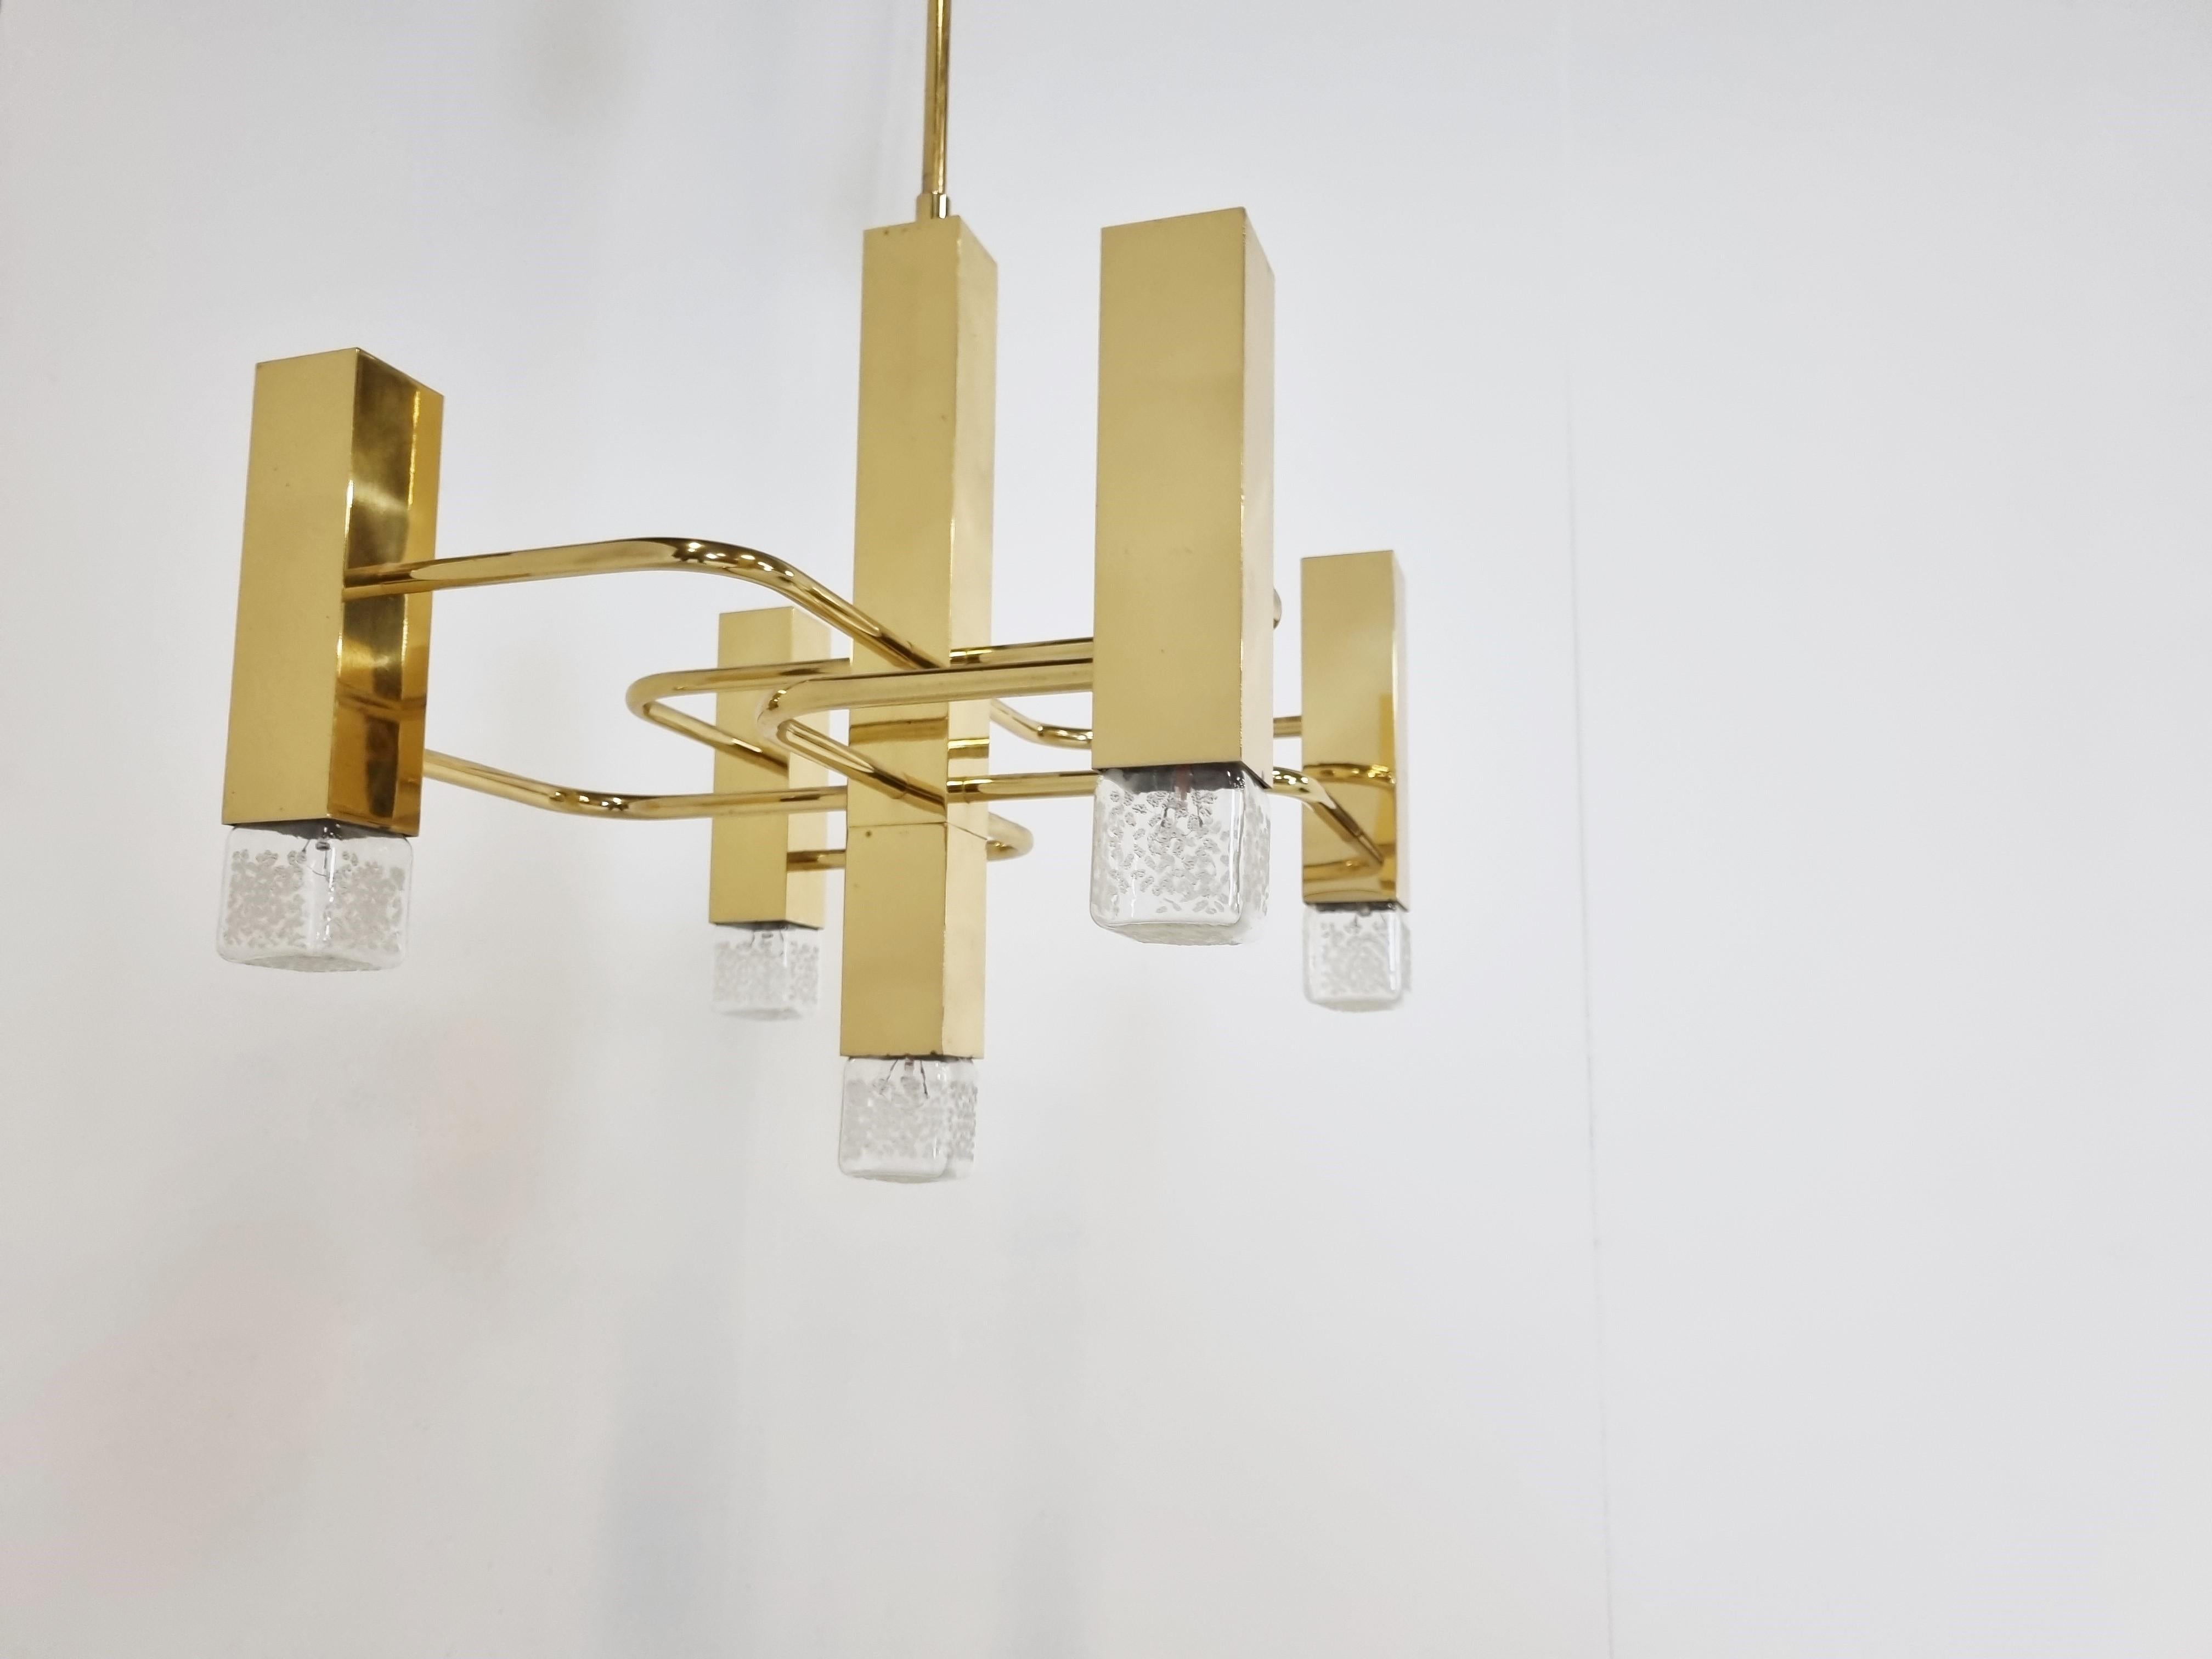 Cubic brass Gaetano Sciolari chandelier with 5 lightpoints.

Produced by Boulanger SA in Belgium

The chandelier is in very good condition and in full working order.

Tested and ready for use, chandelier will work all around the world

1970s